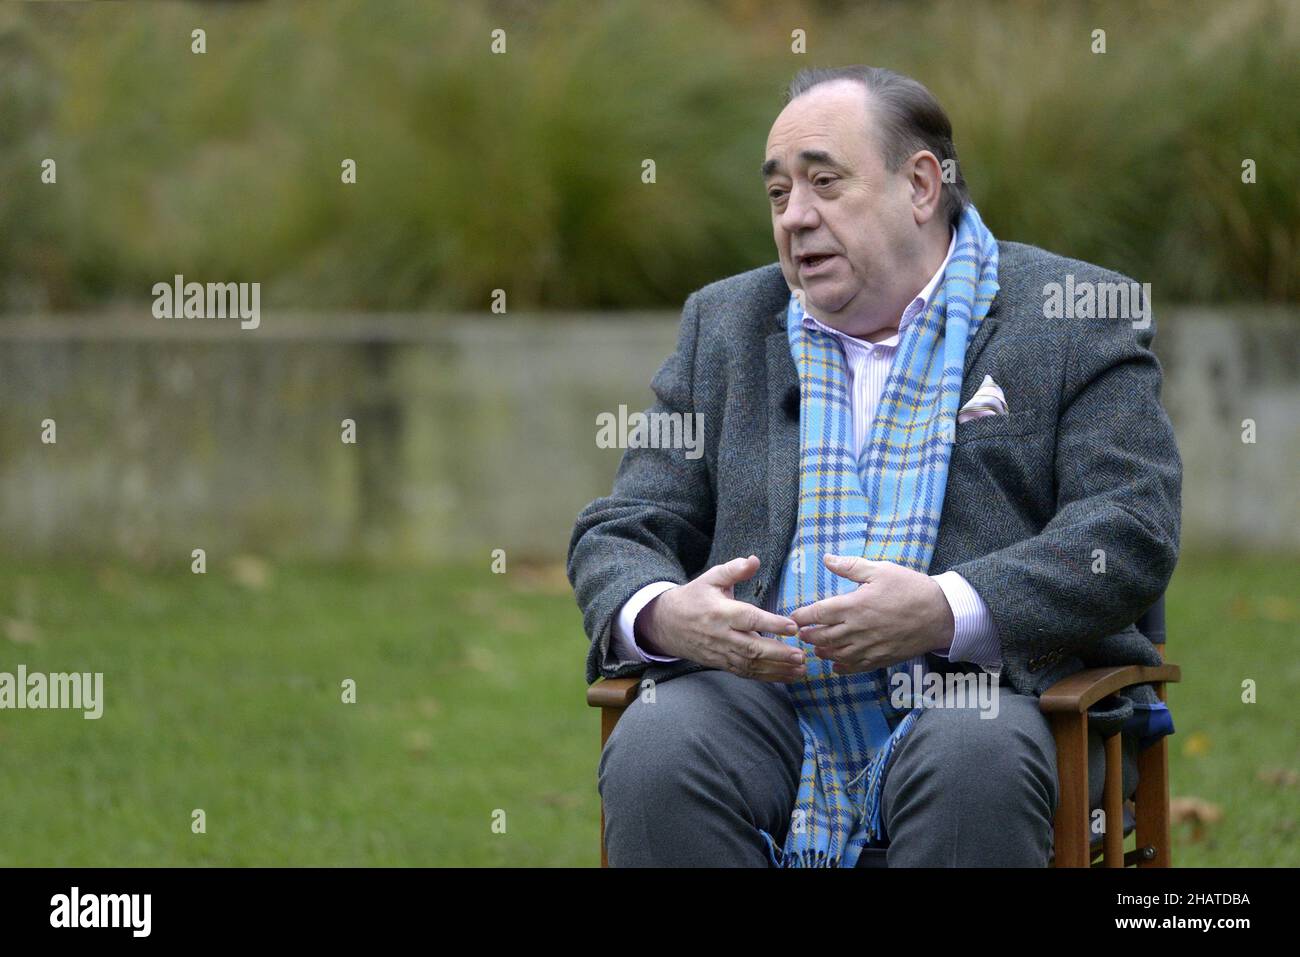 Alex Salmond - Former SNP MP and First Minister of Scotland - conductring a TV interview on College Green, Westminster, London 14th December 2021 Stock Photo